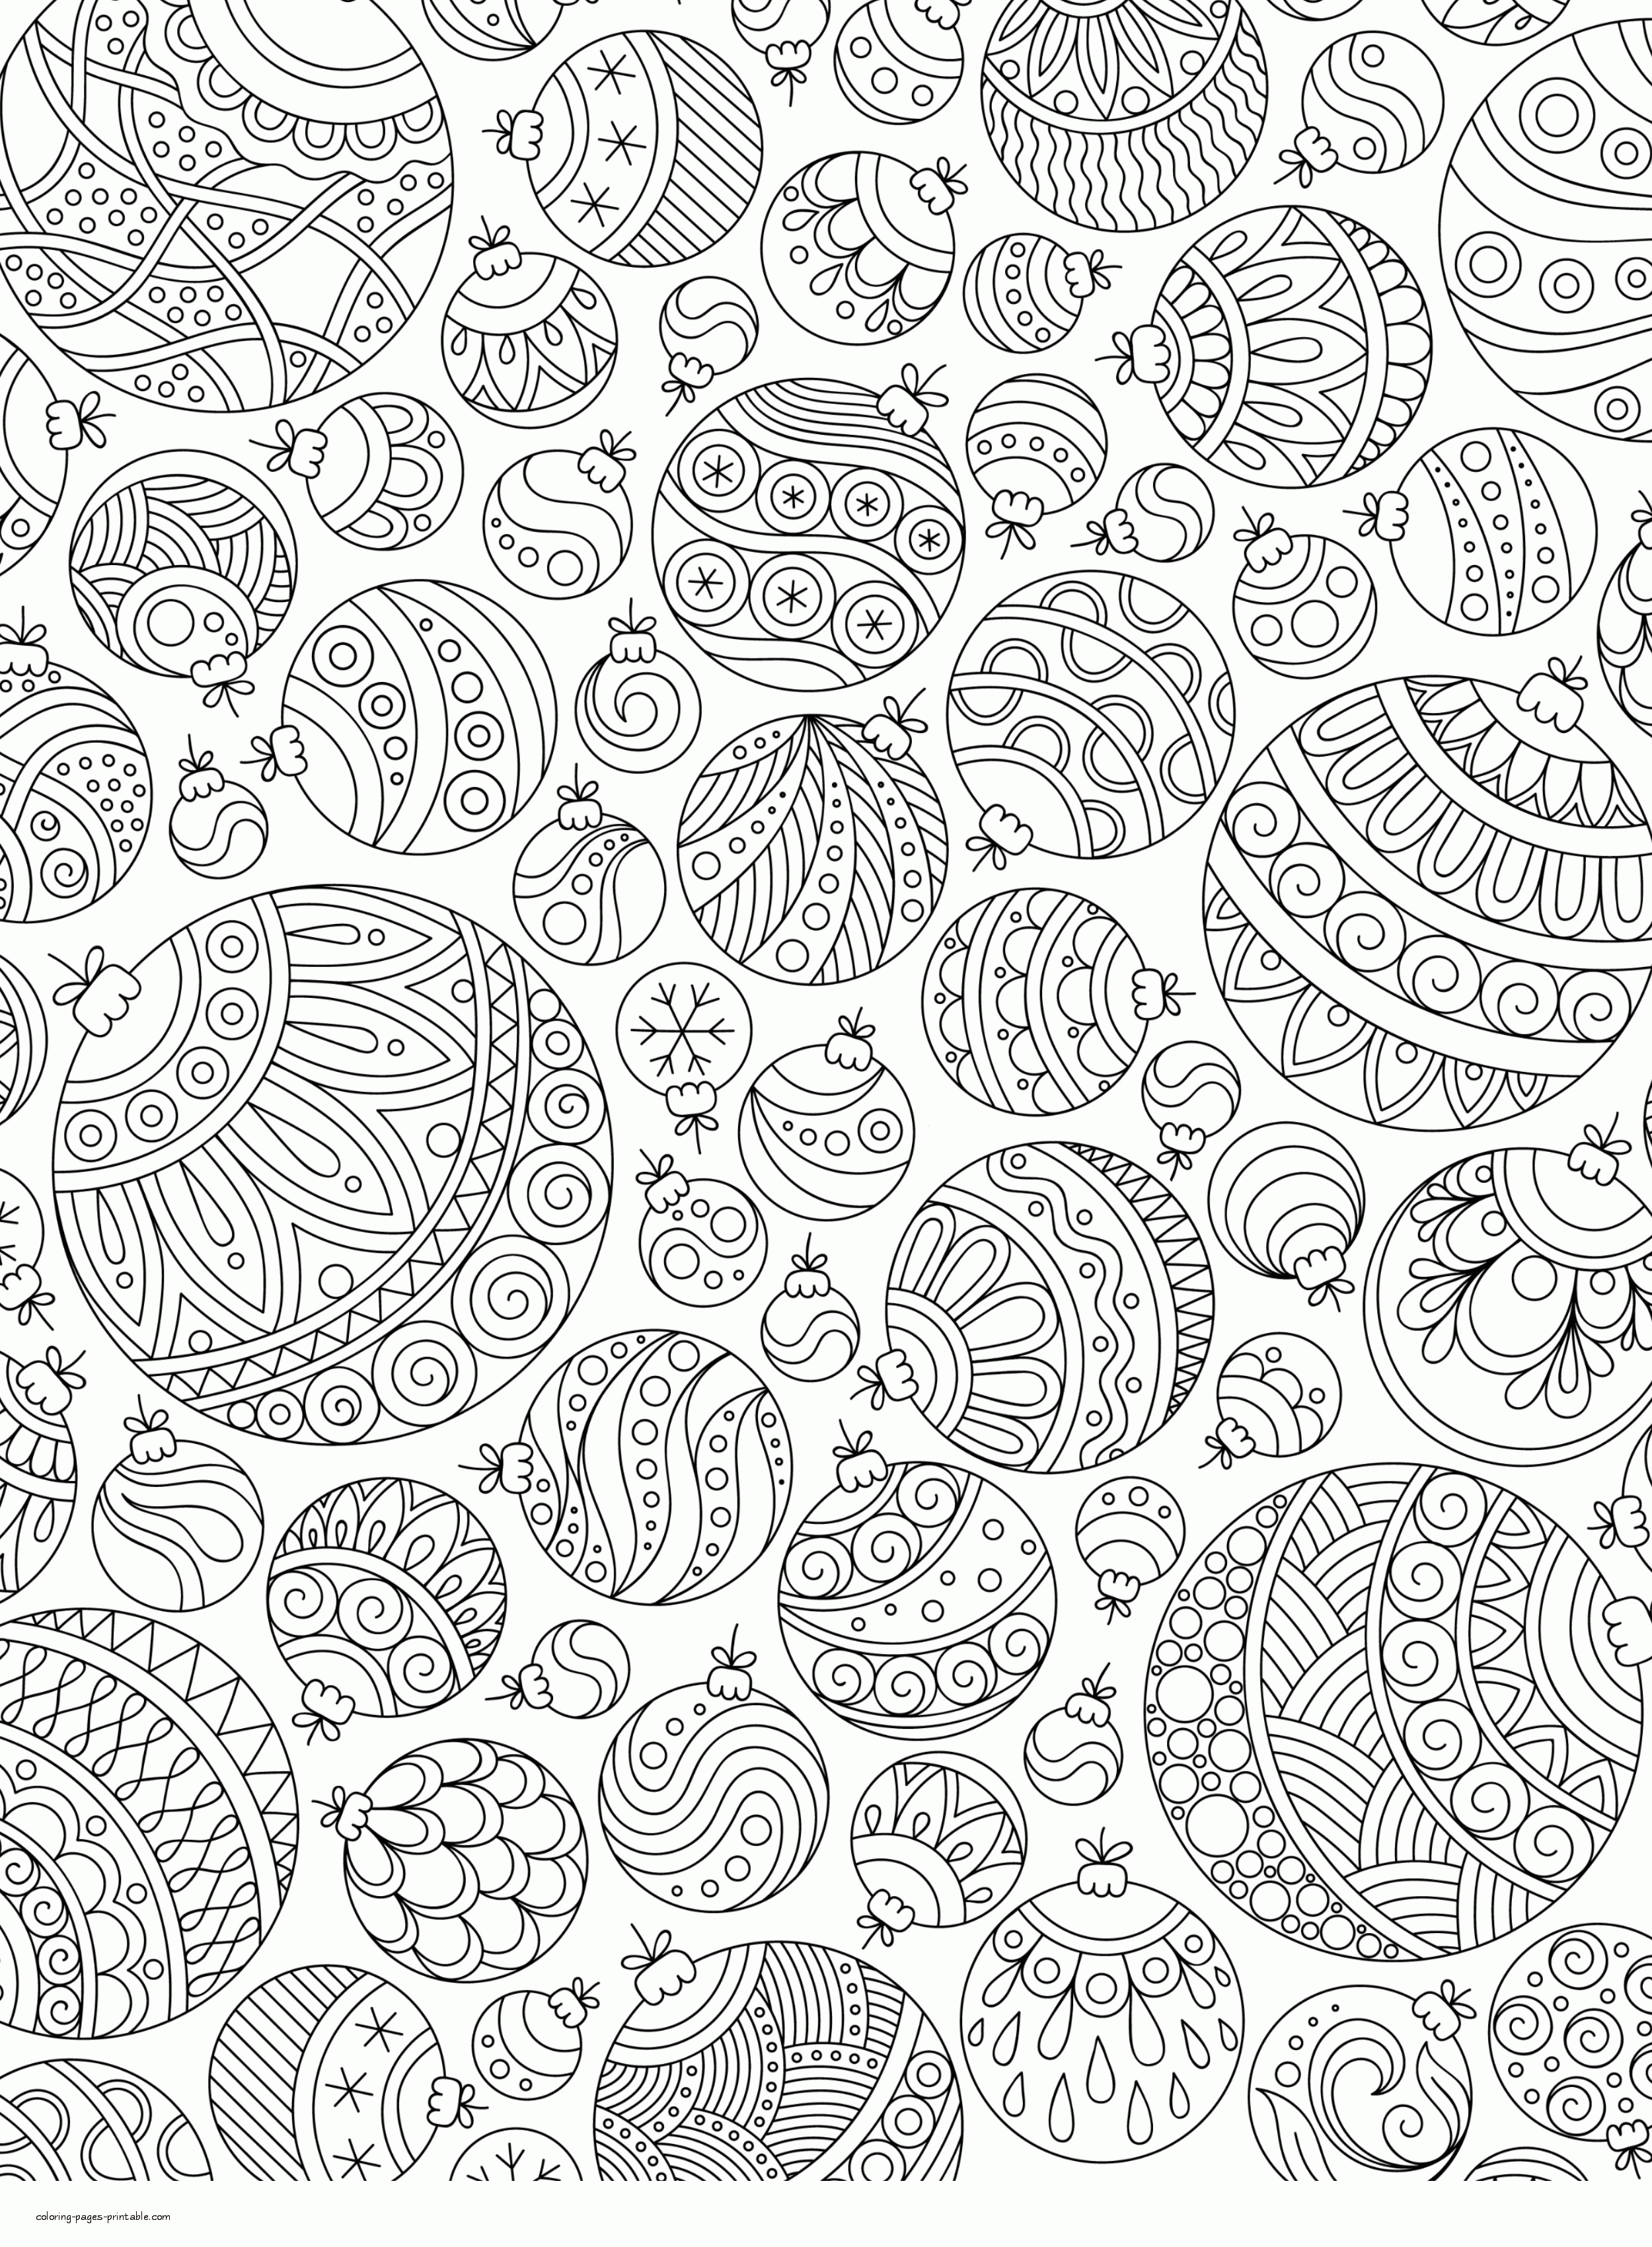 Full Page Coloring Pages With Christmas Ornament. Big size